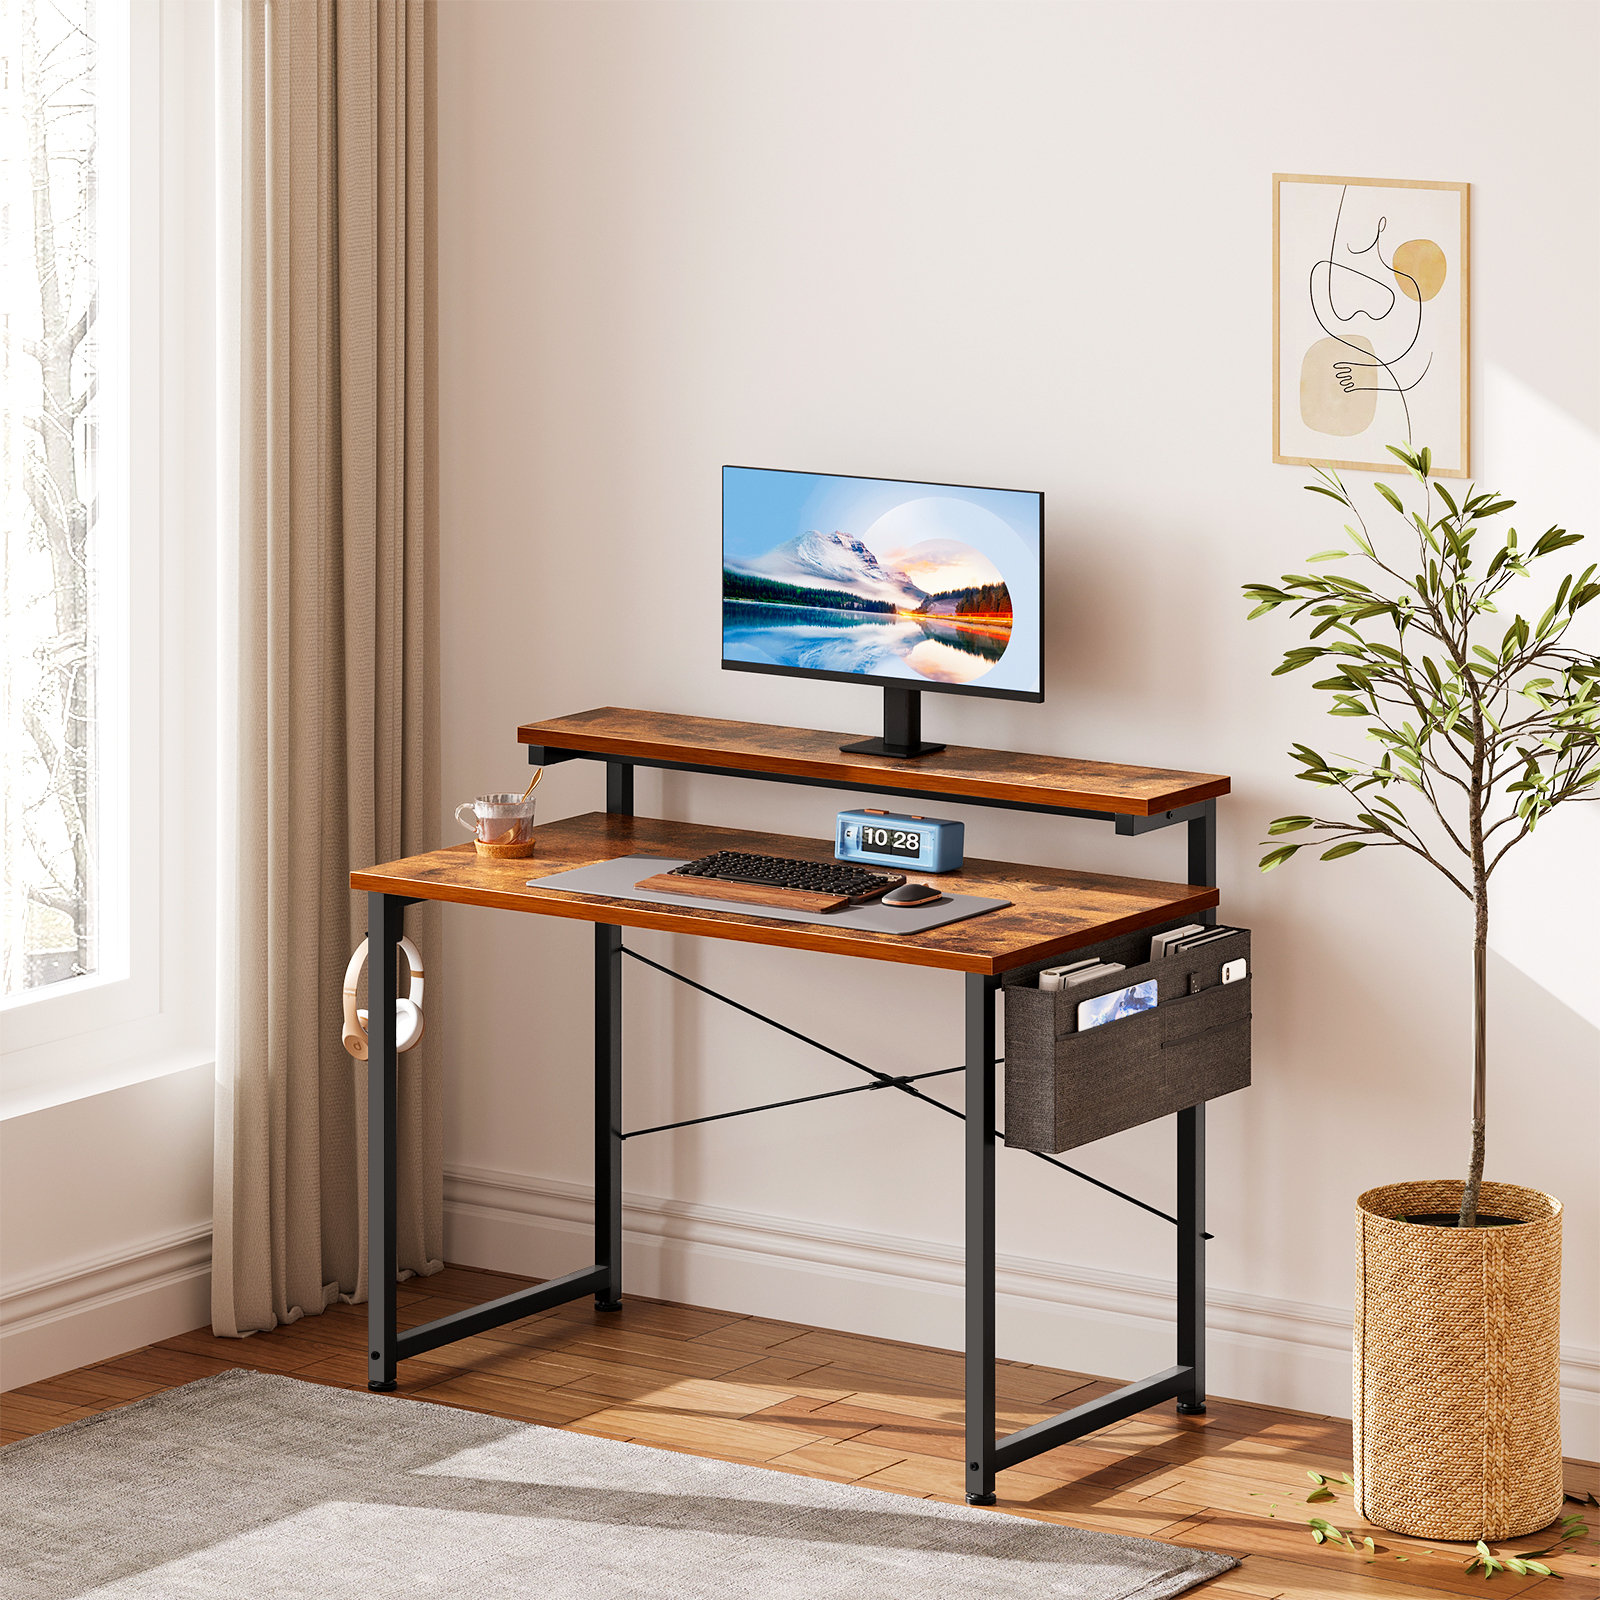 Computer Desk Small Office Desk 40 Inch Writing Desks Small Space Desk  Study Table Modern Simple Style Work Table with Storage Bag Iron Hook  Wooden Tabletop Metal Frame for Home, Bedroom 